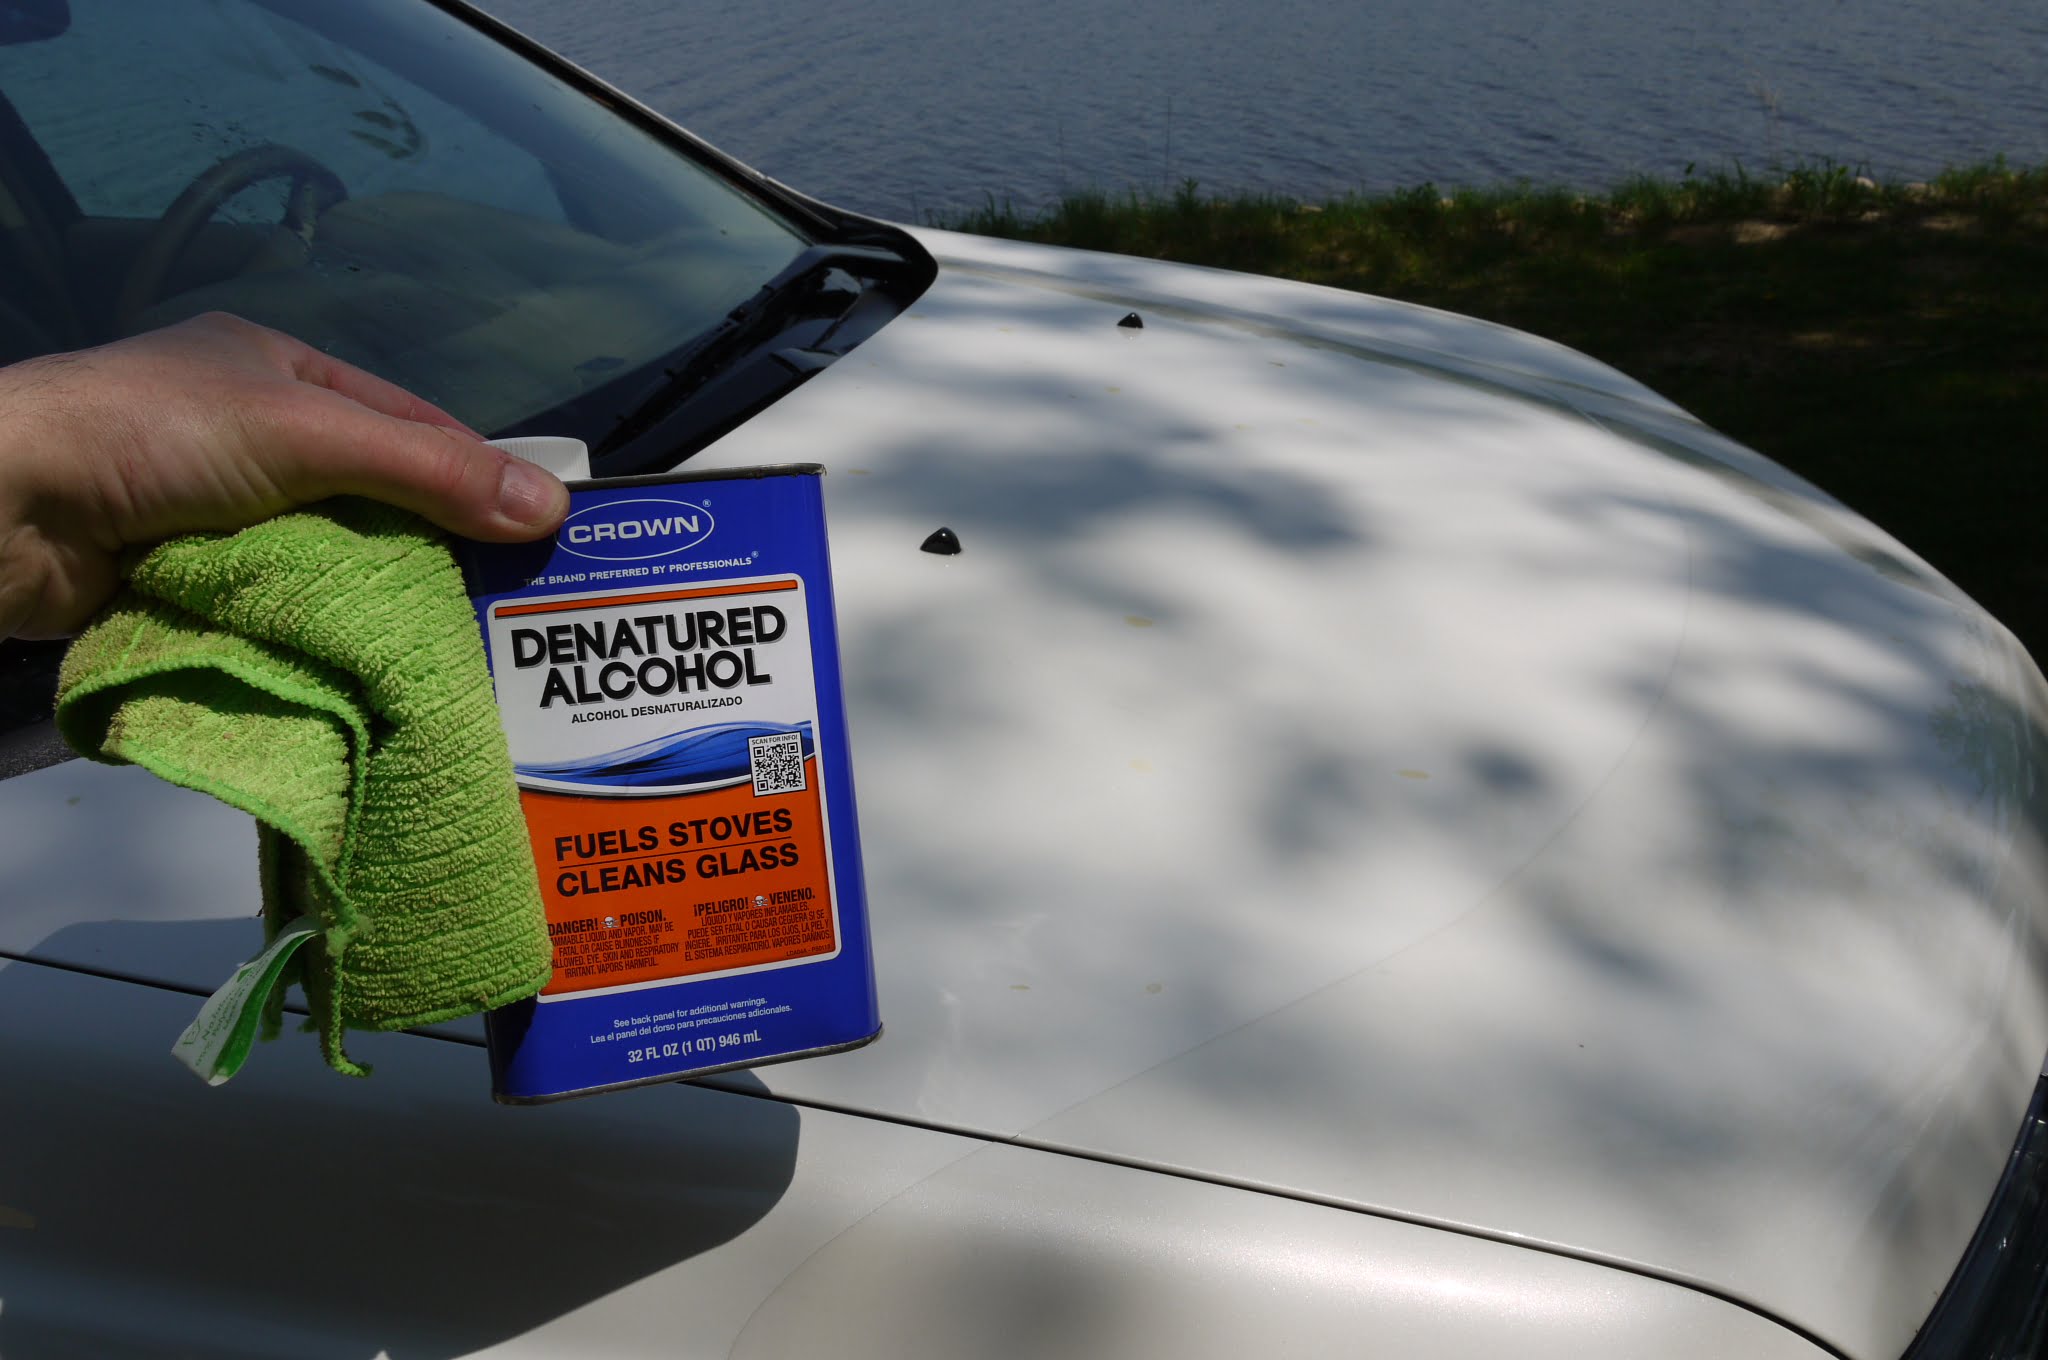 How Do I Remove Tree Sap From My Car? – Ask a Pro Blog